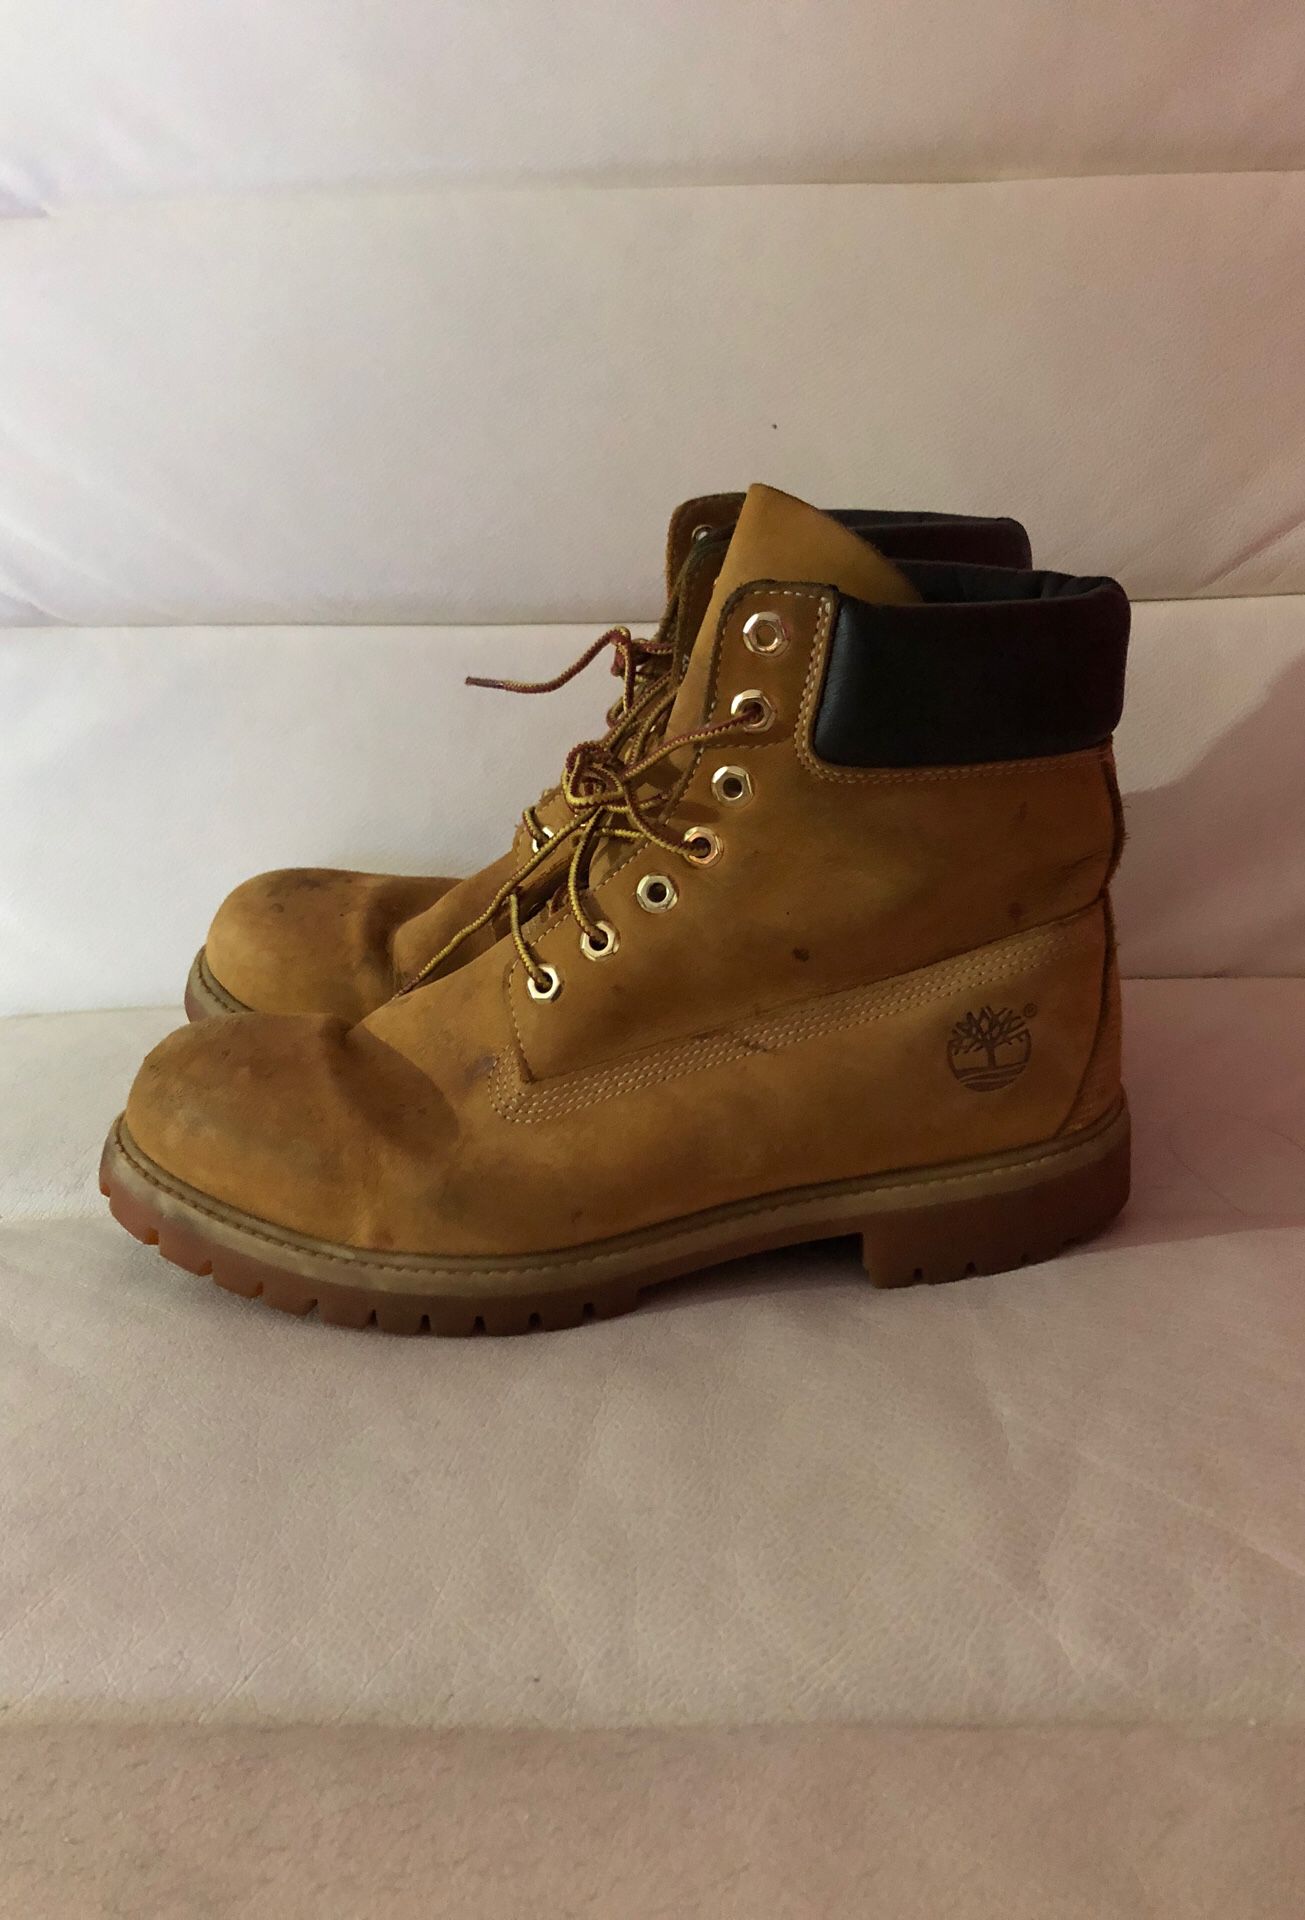 Timberland work boots (used) looking for new home